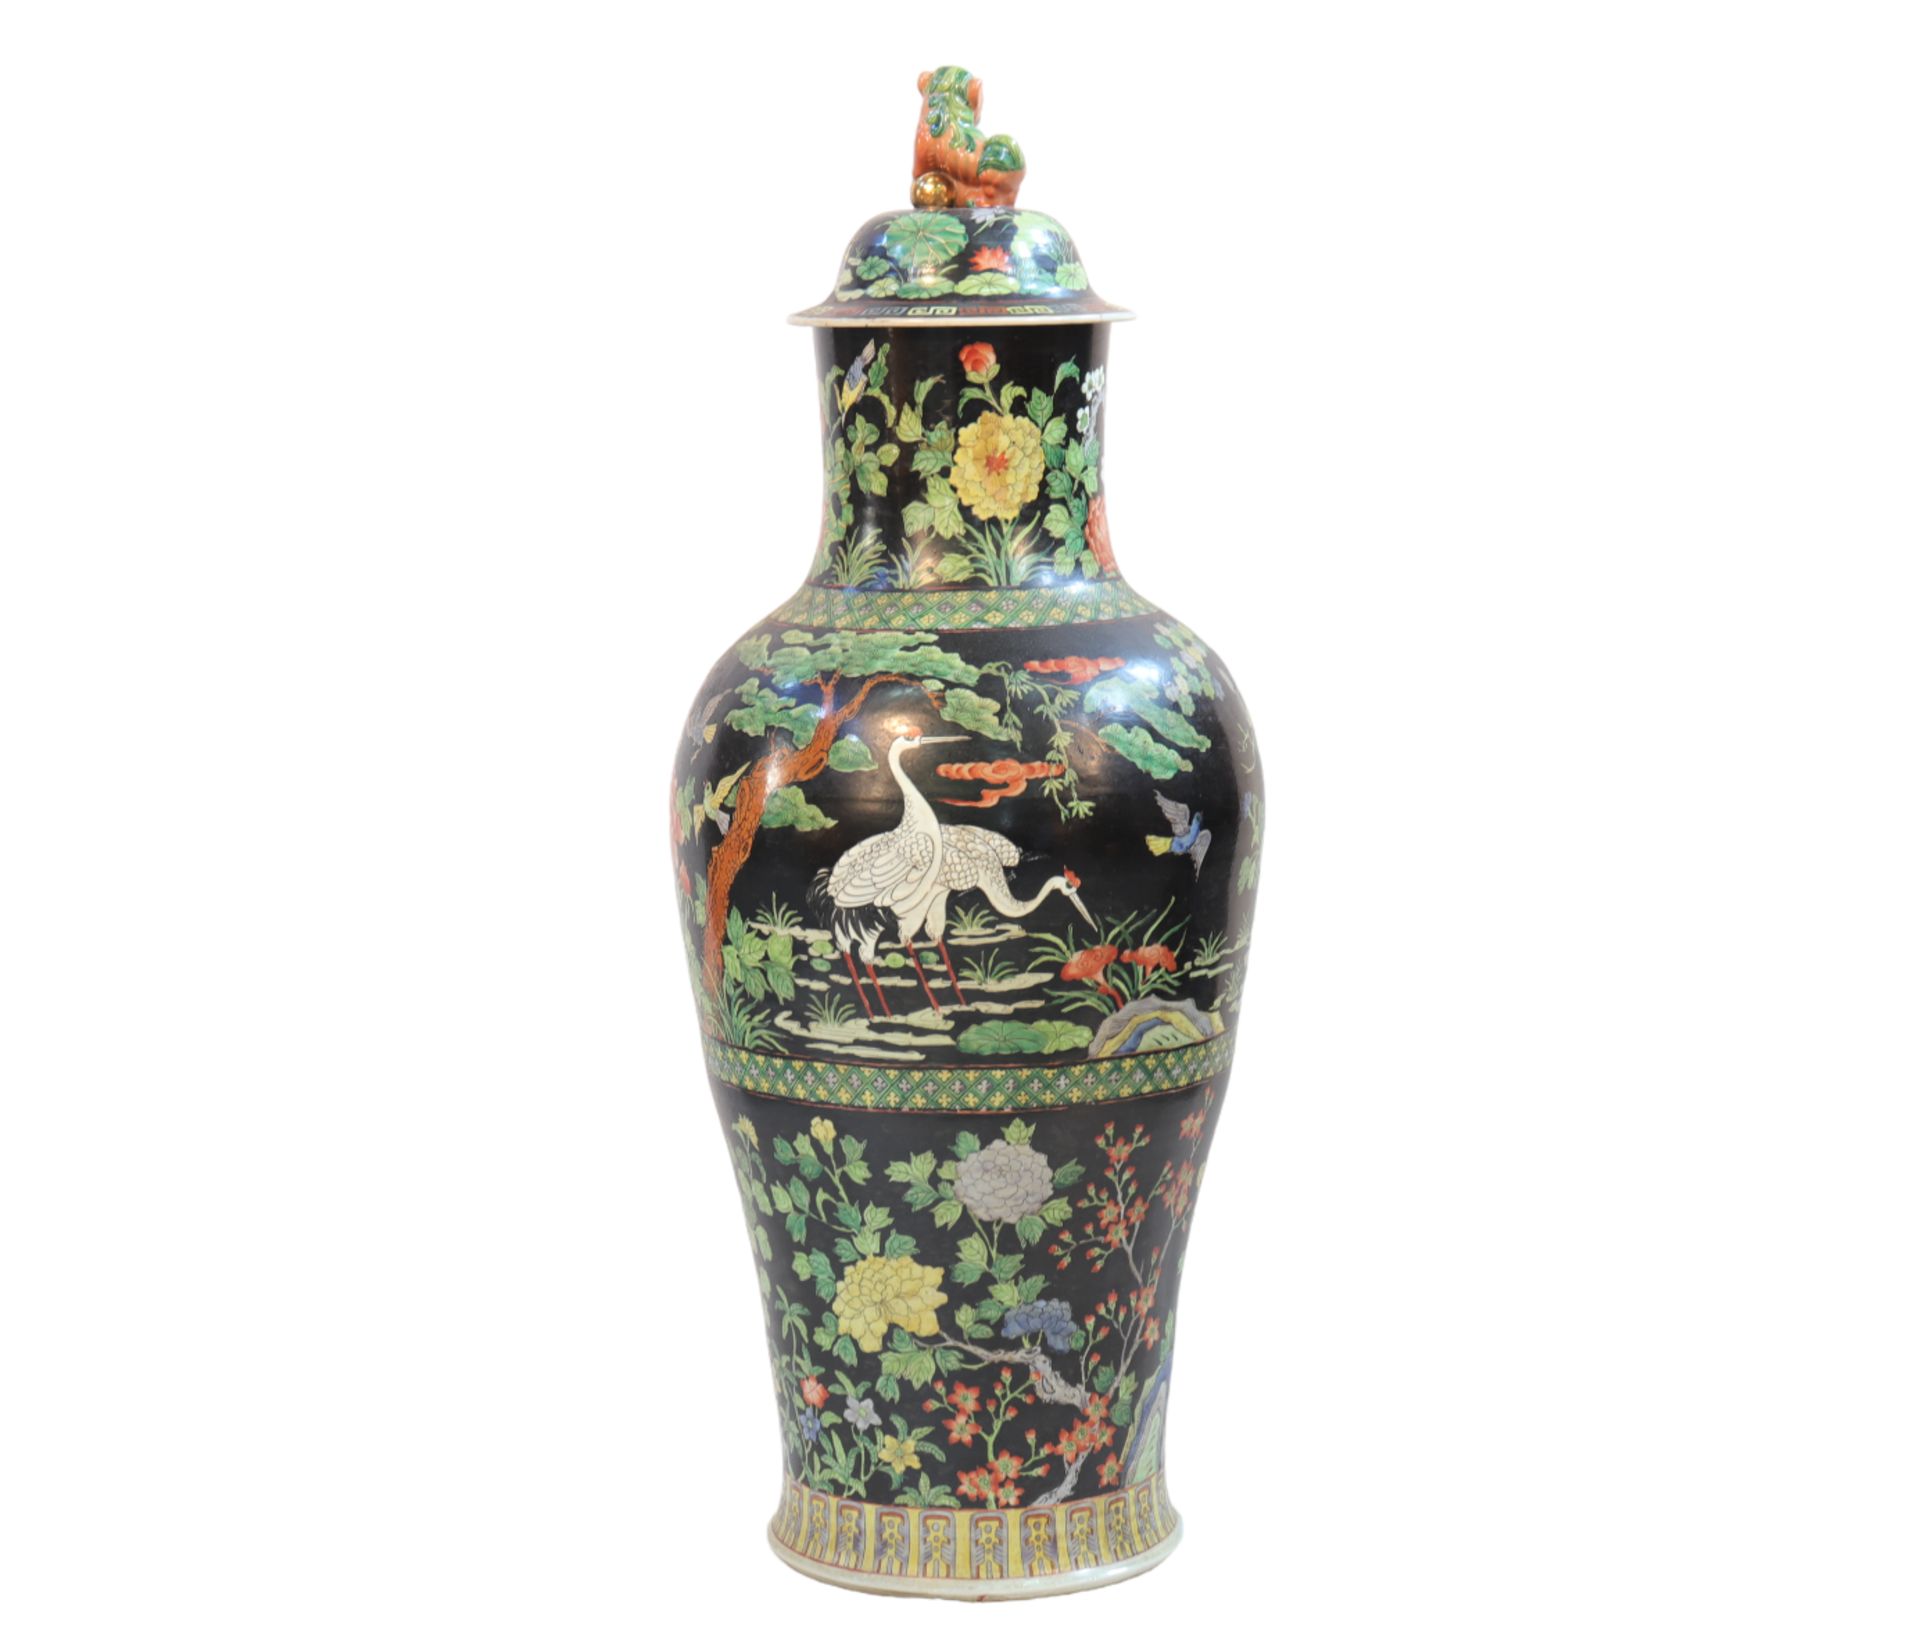 Covered vase from the Famille Noire decorated with flowers and birds from the 19th century - Image 2 of 5